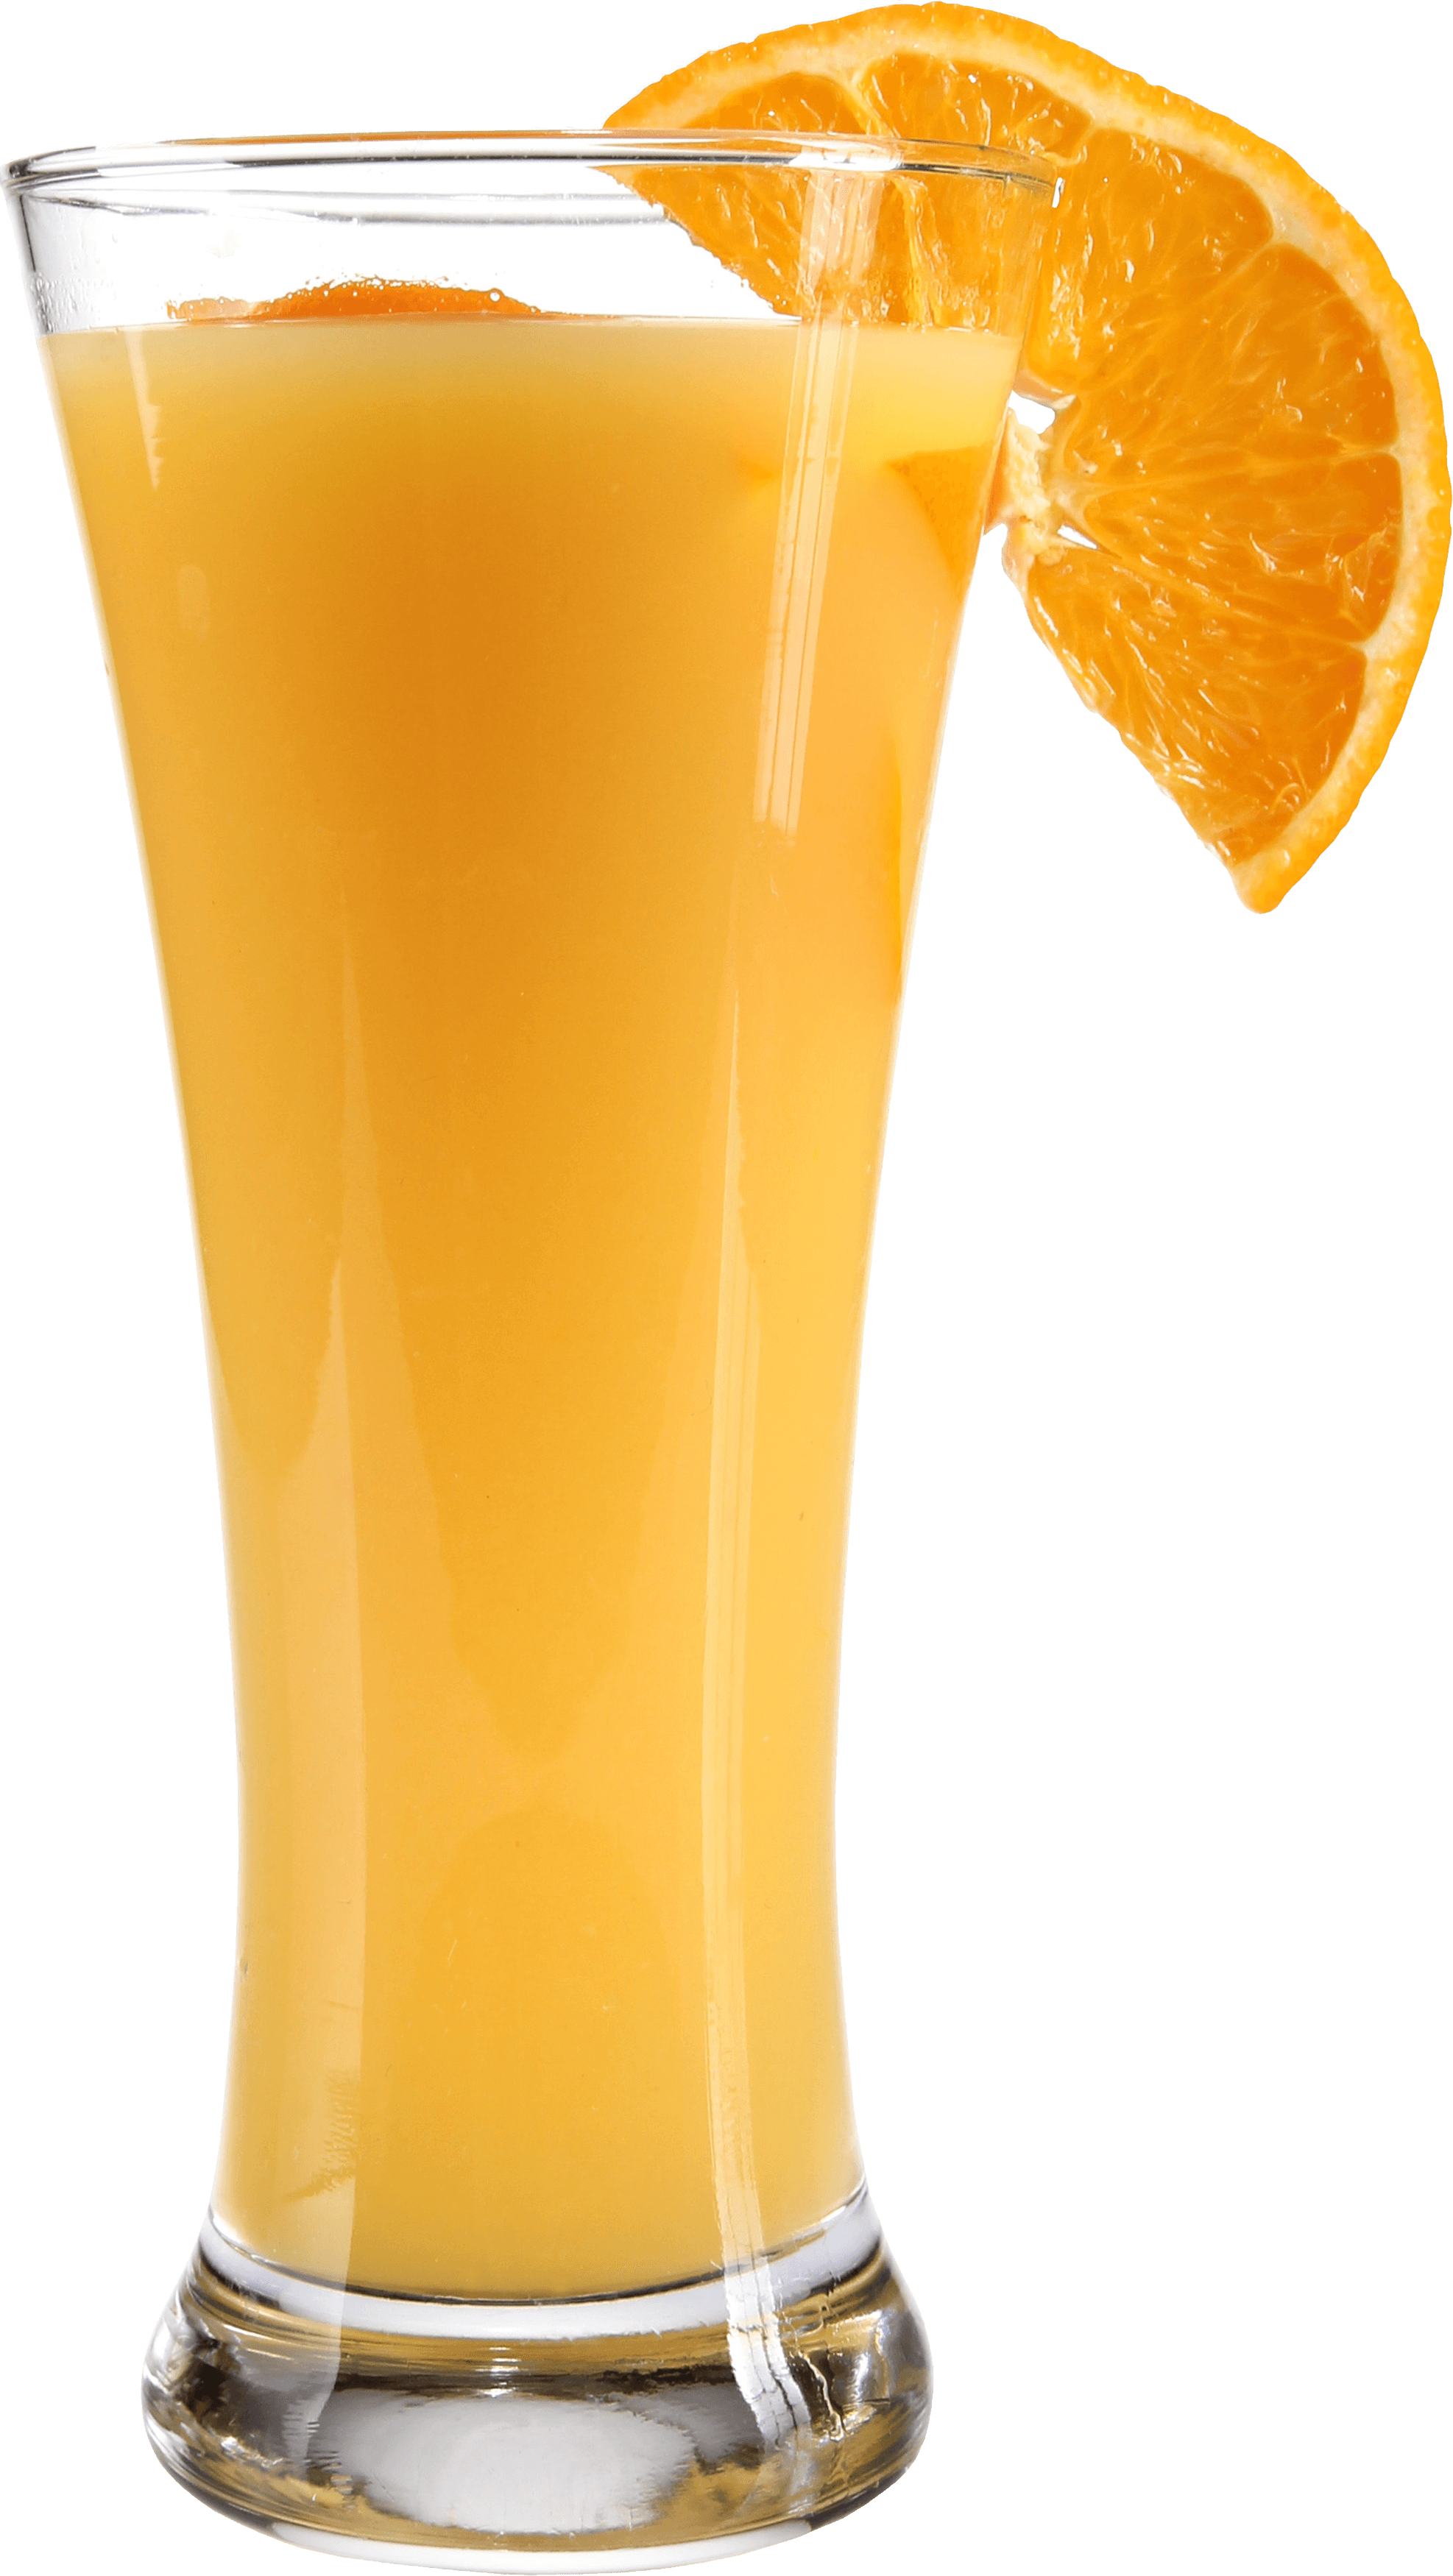 Fruit juice and beverage cups